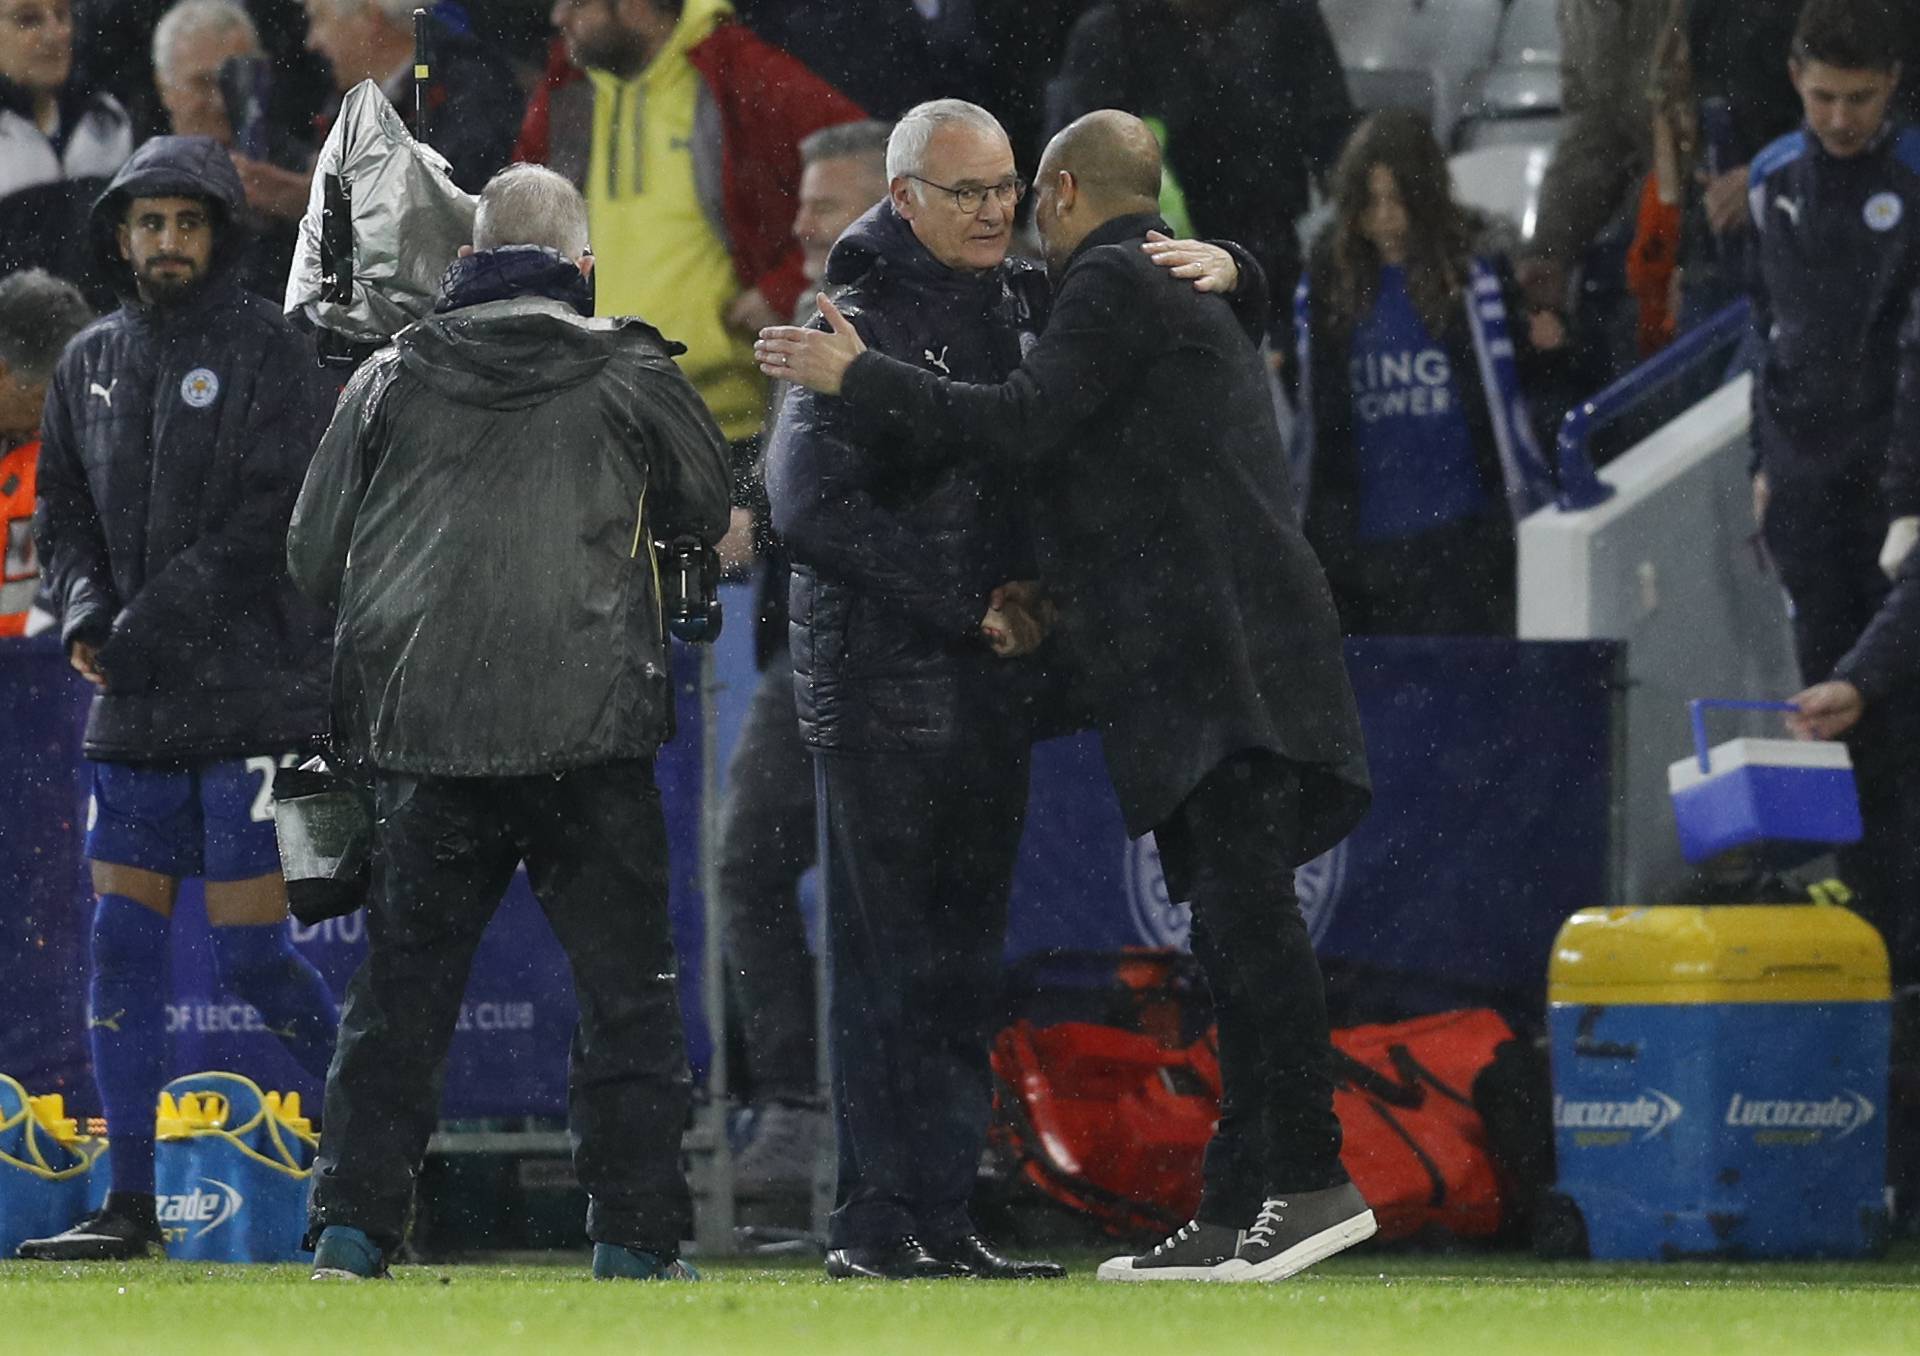 Manchester City manager Pep Guardiola and Leicester City manager Claudio Ranieri embrace at the end of the match